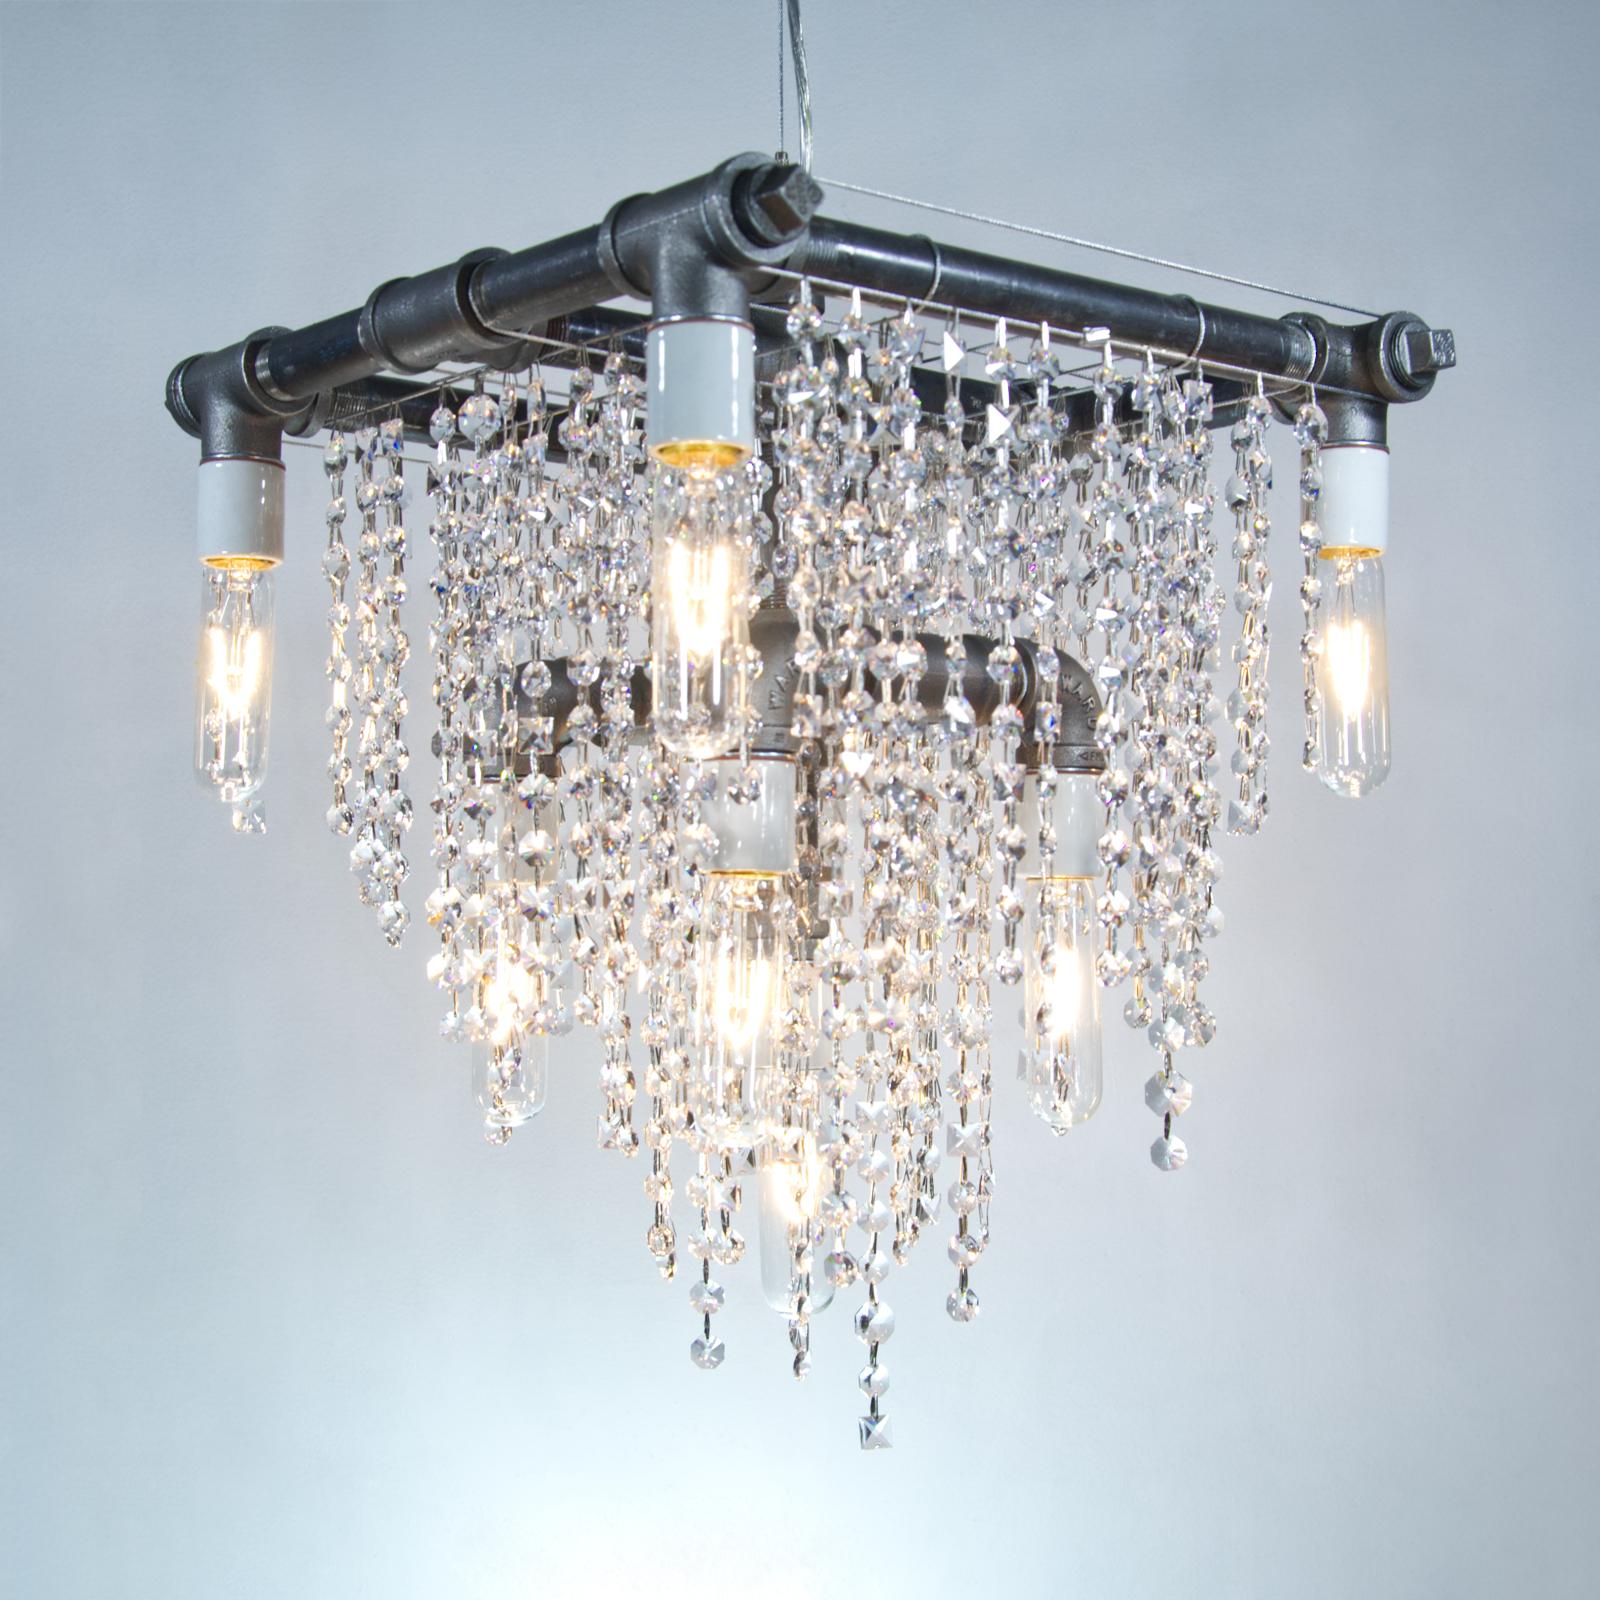 Industrial 9 bulb compact pendant chandelier by Michael McHale
Dimensions: D 35.5 x W 35.5 x H 40.5
Materials: steel, optically-pure gem-cut crystal.

9 x medium base T6 bulb, either incandescent or LED

All our lamps can be wired according to